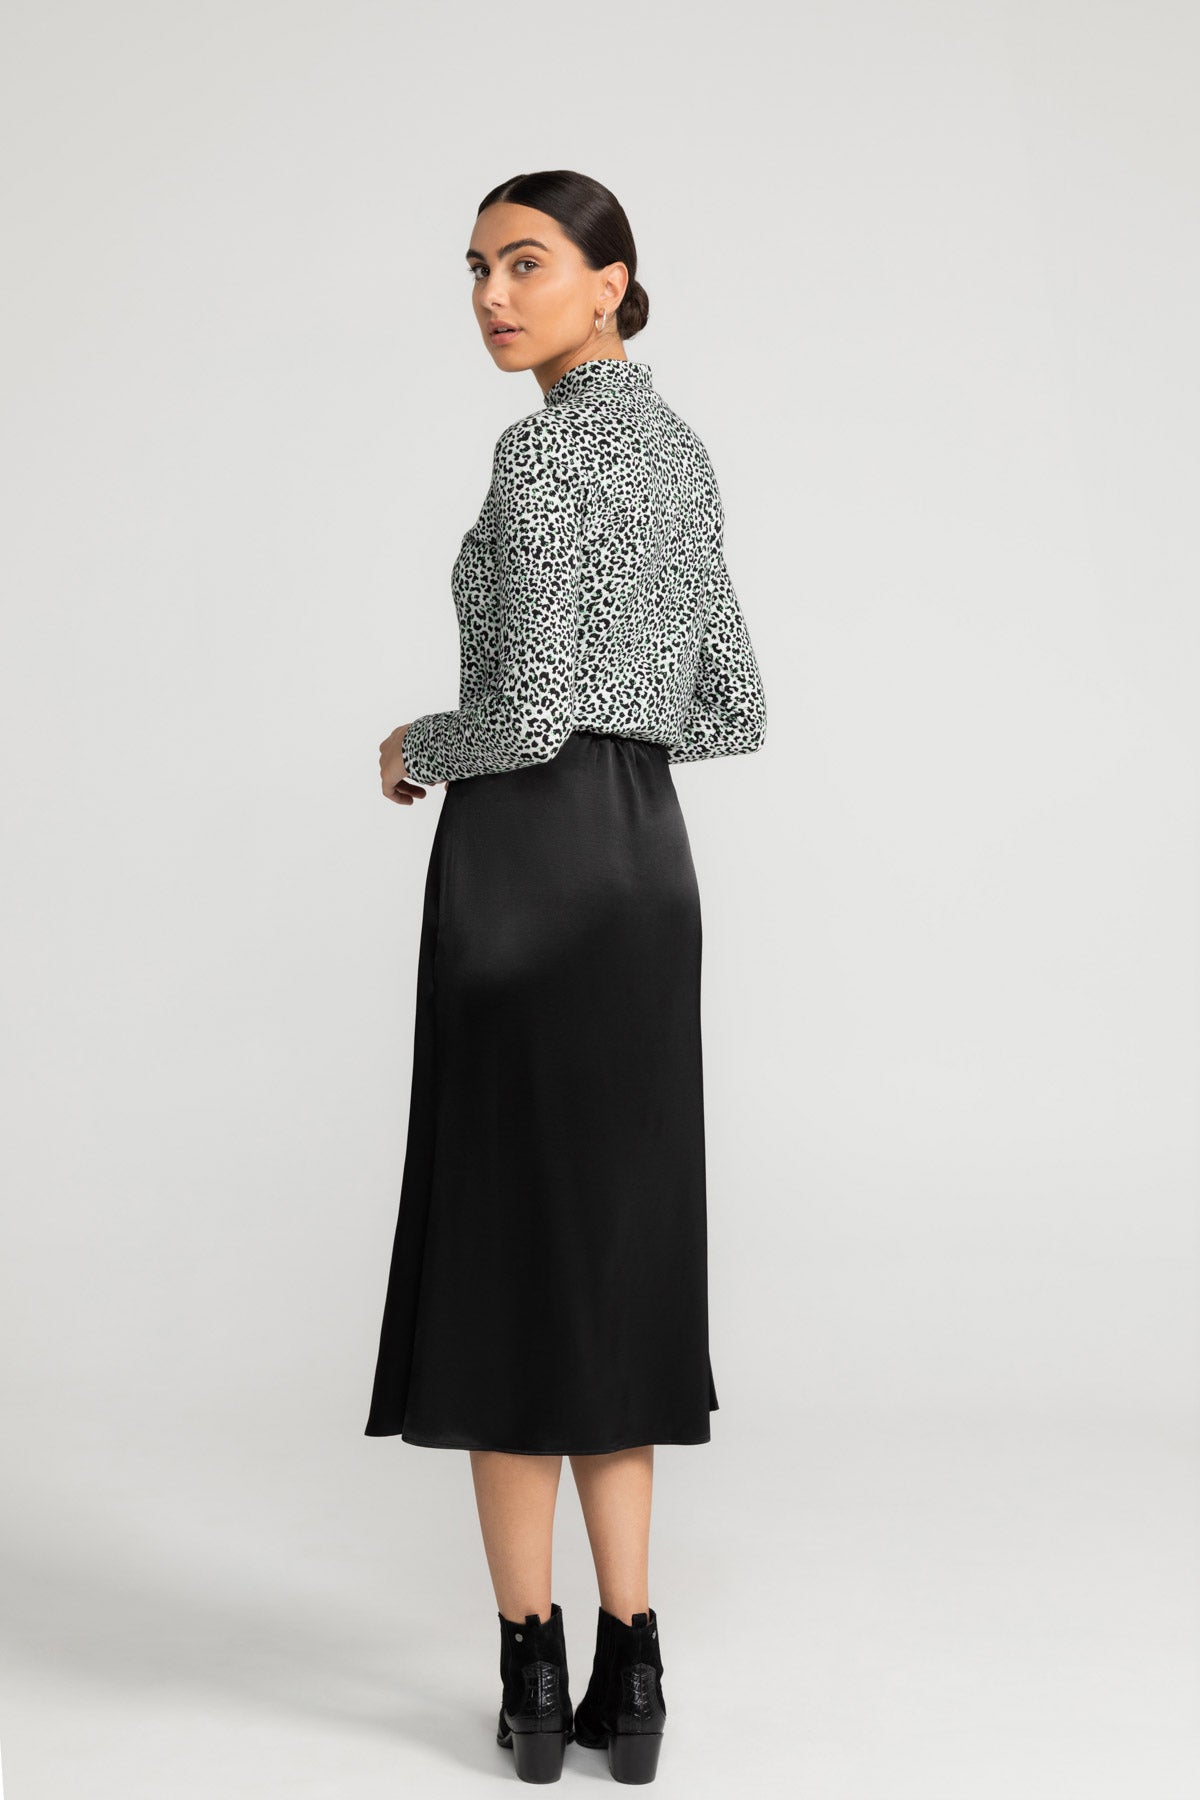 Skirt LEONNE in black by LOVJOI made from sustainable ENKA® viscose and Ecovero™